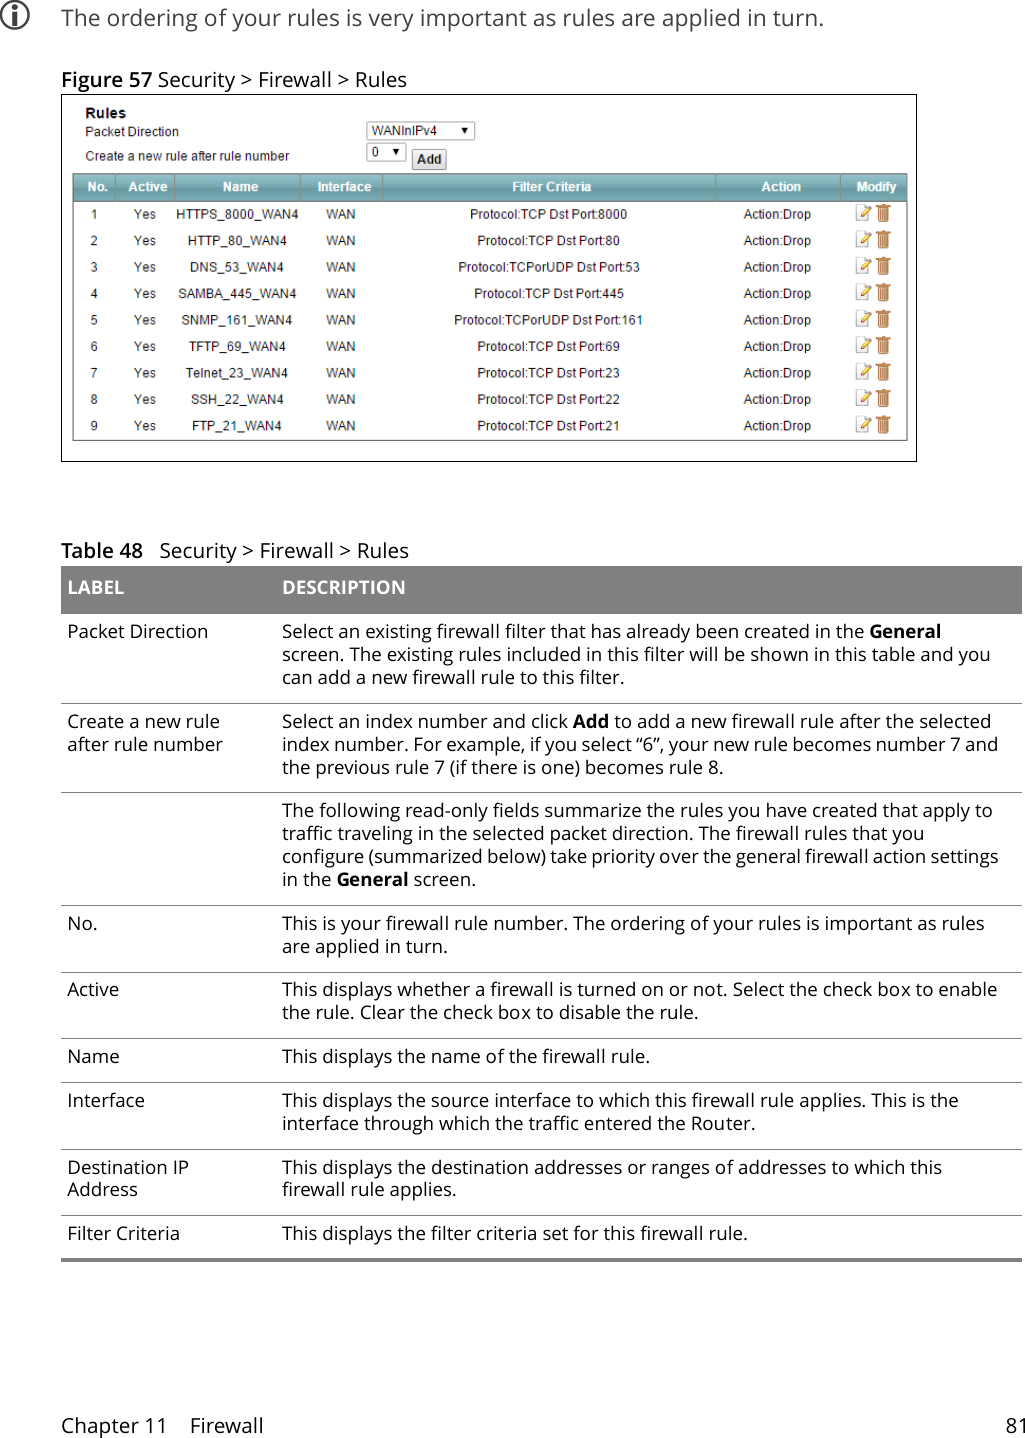 Chapter 11    Firewall 81 The ordering of your rules is very important as rules are applied in turn.Figure 57 Security &gt; Firewall &gt; Rules  Table 48   Security &gt; Firewall &gt; Rules LABEL DESCRIPTIONPacket Direction Select an existing firewall filter that has already been created in the General screen. The existing rules included in this filter will be shown in this table and you can add a new firewall rule to this filter.Create a new rule after rule number Select an index number and click Add to add a new firewall rule after the selected index number. For example, if you select “6”, your new rule becomes number 7 and the previous rule 7 (if there is one) becomes rule 8.The following read-only fields summarize the rules you have created that apply to traffic traveling in the selected packet direction. The firewall rules that you configure (summarized below) take priority over the general firewall action settings in the General screen.No. This is your firewall rule number. The ordering of your rules is important as rules are applied in turn. Active This displays whether a firewall is turned on or not. Select the check box to enable the rule. Clear the check box to disable the rule.Name This displays the name of the firewall rule.Interface This displays the source interface to which this firewall rule applies. This is the interface through which the traffic entered the Router. Destination IP AddressThis displays the destination addresses or ranges of addresses to which this firewall rule applies. Filter Criteria This displays the filter criteria set for this firewall rule. 